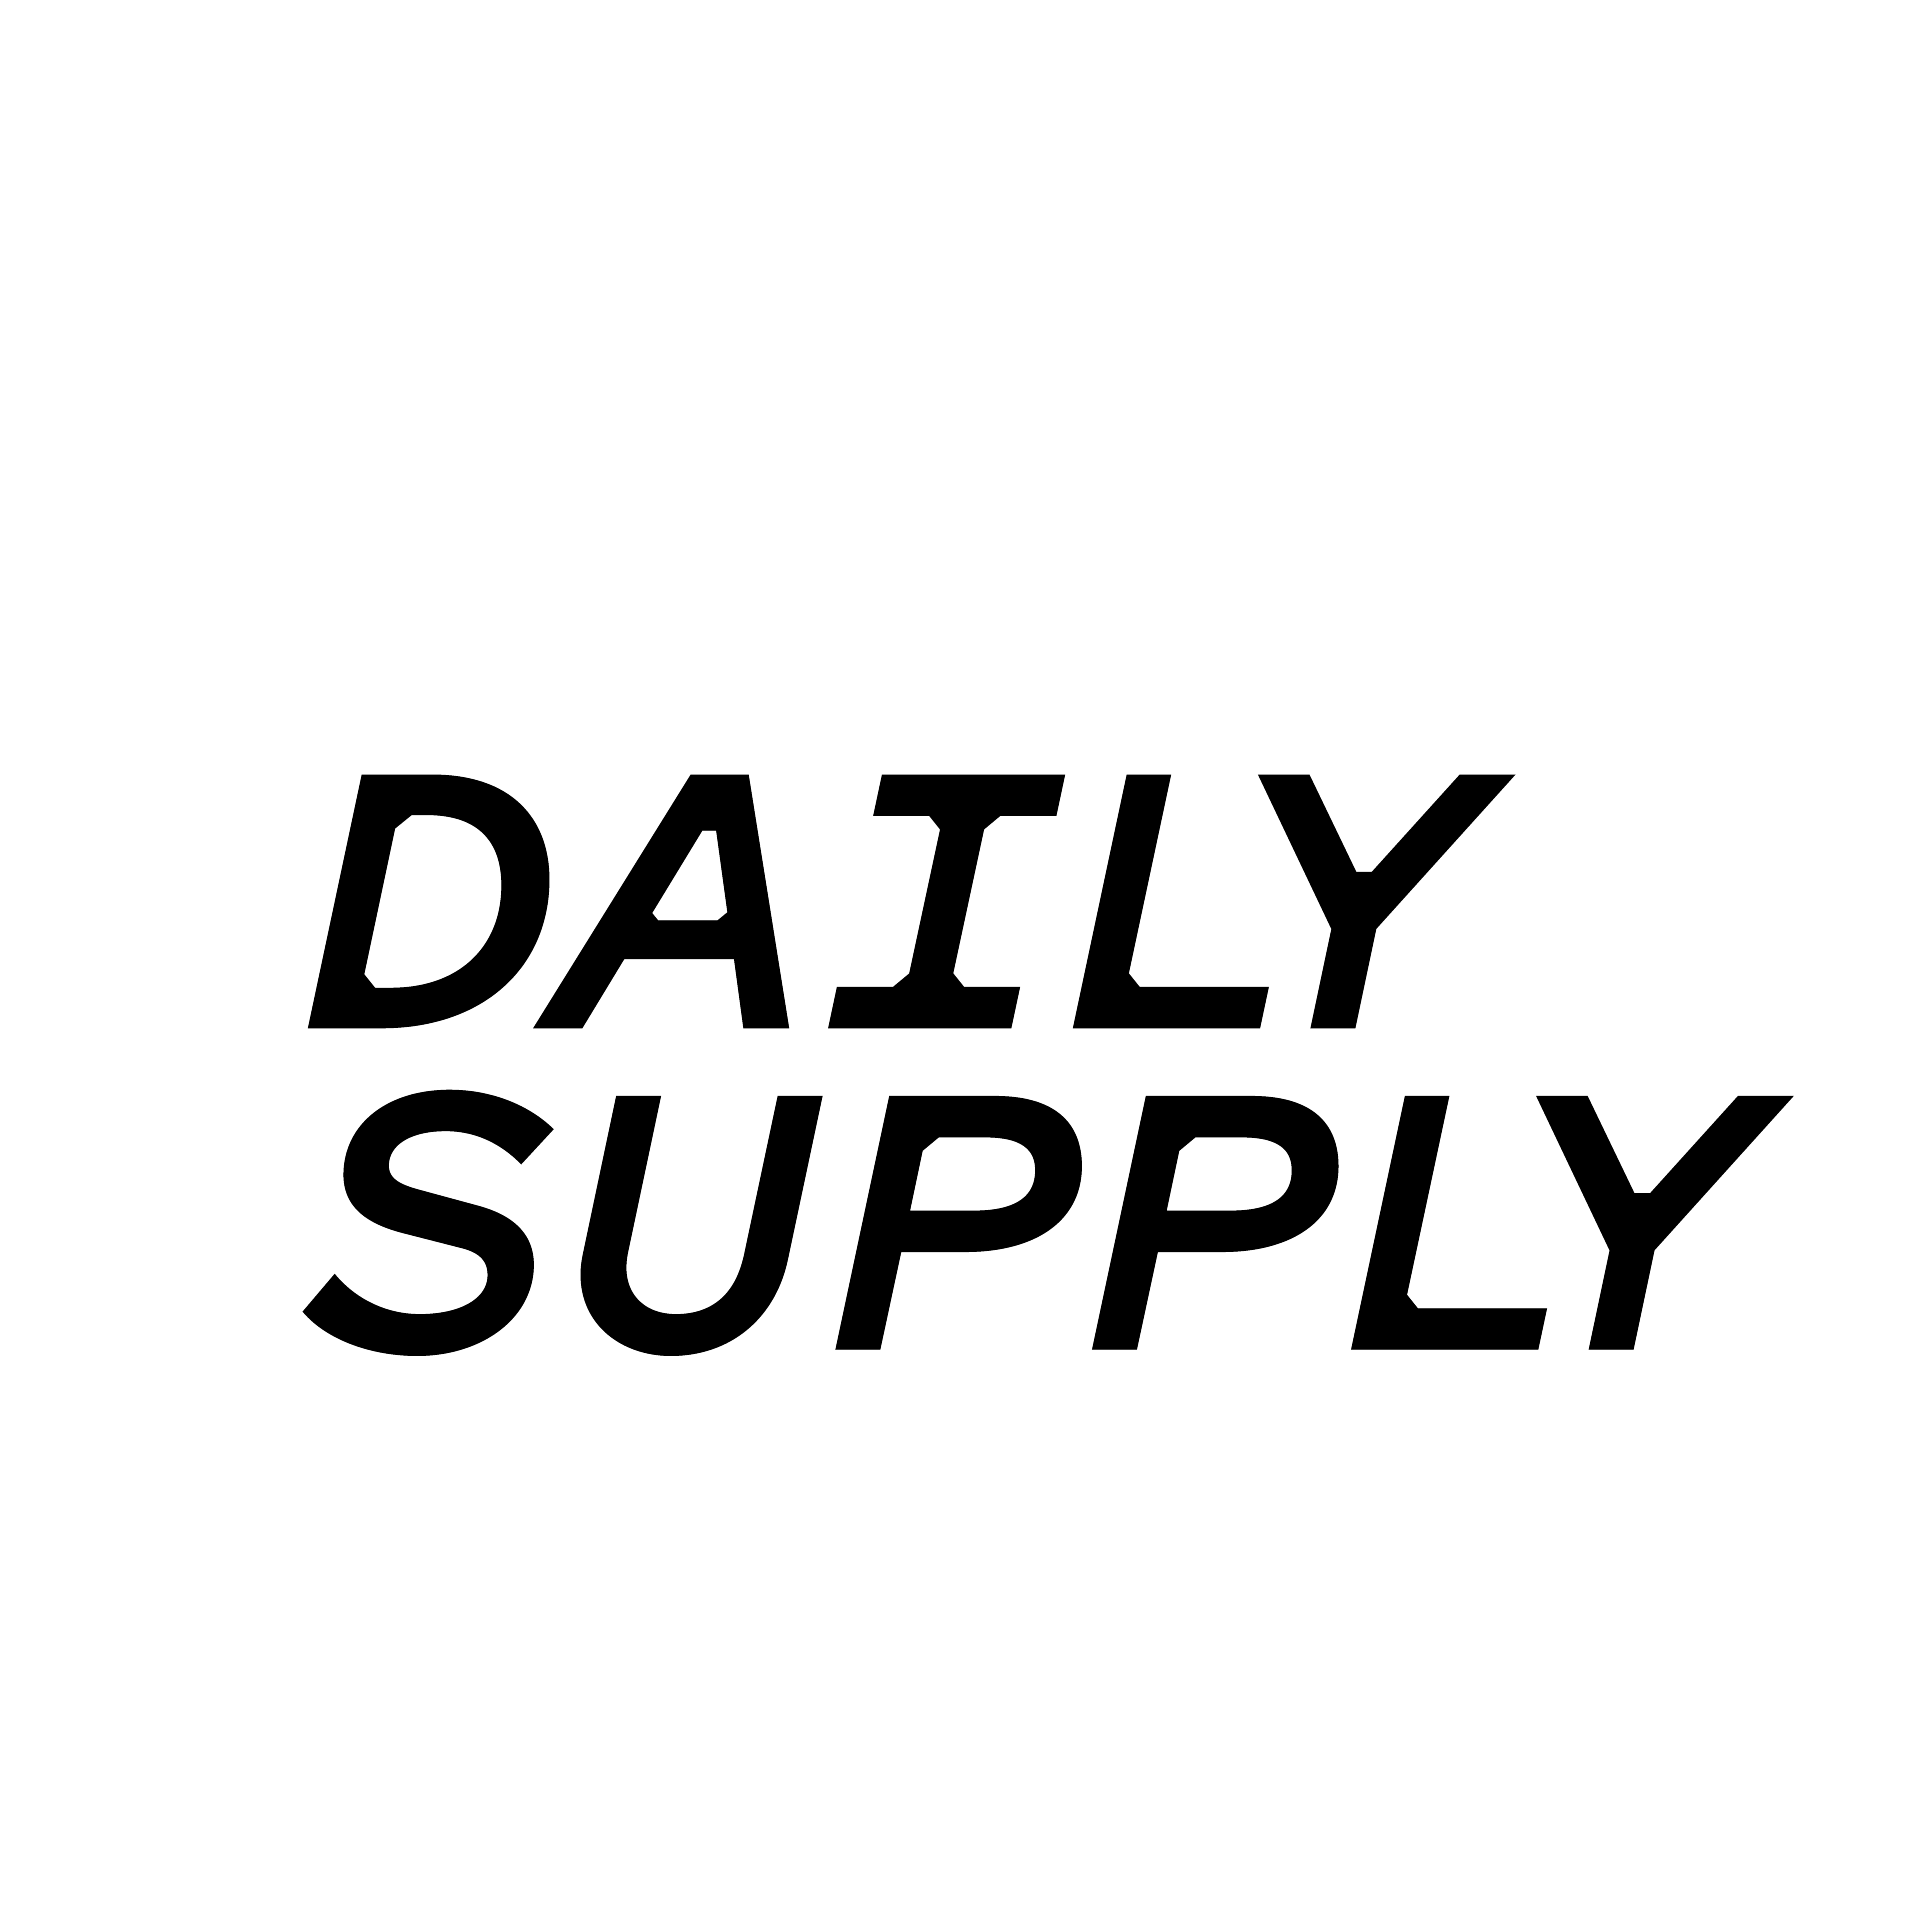 Daily Supply • 2019